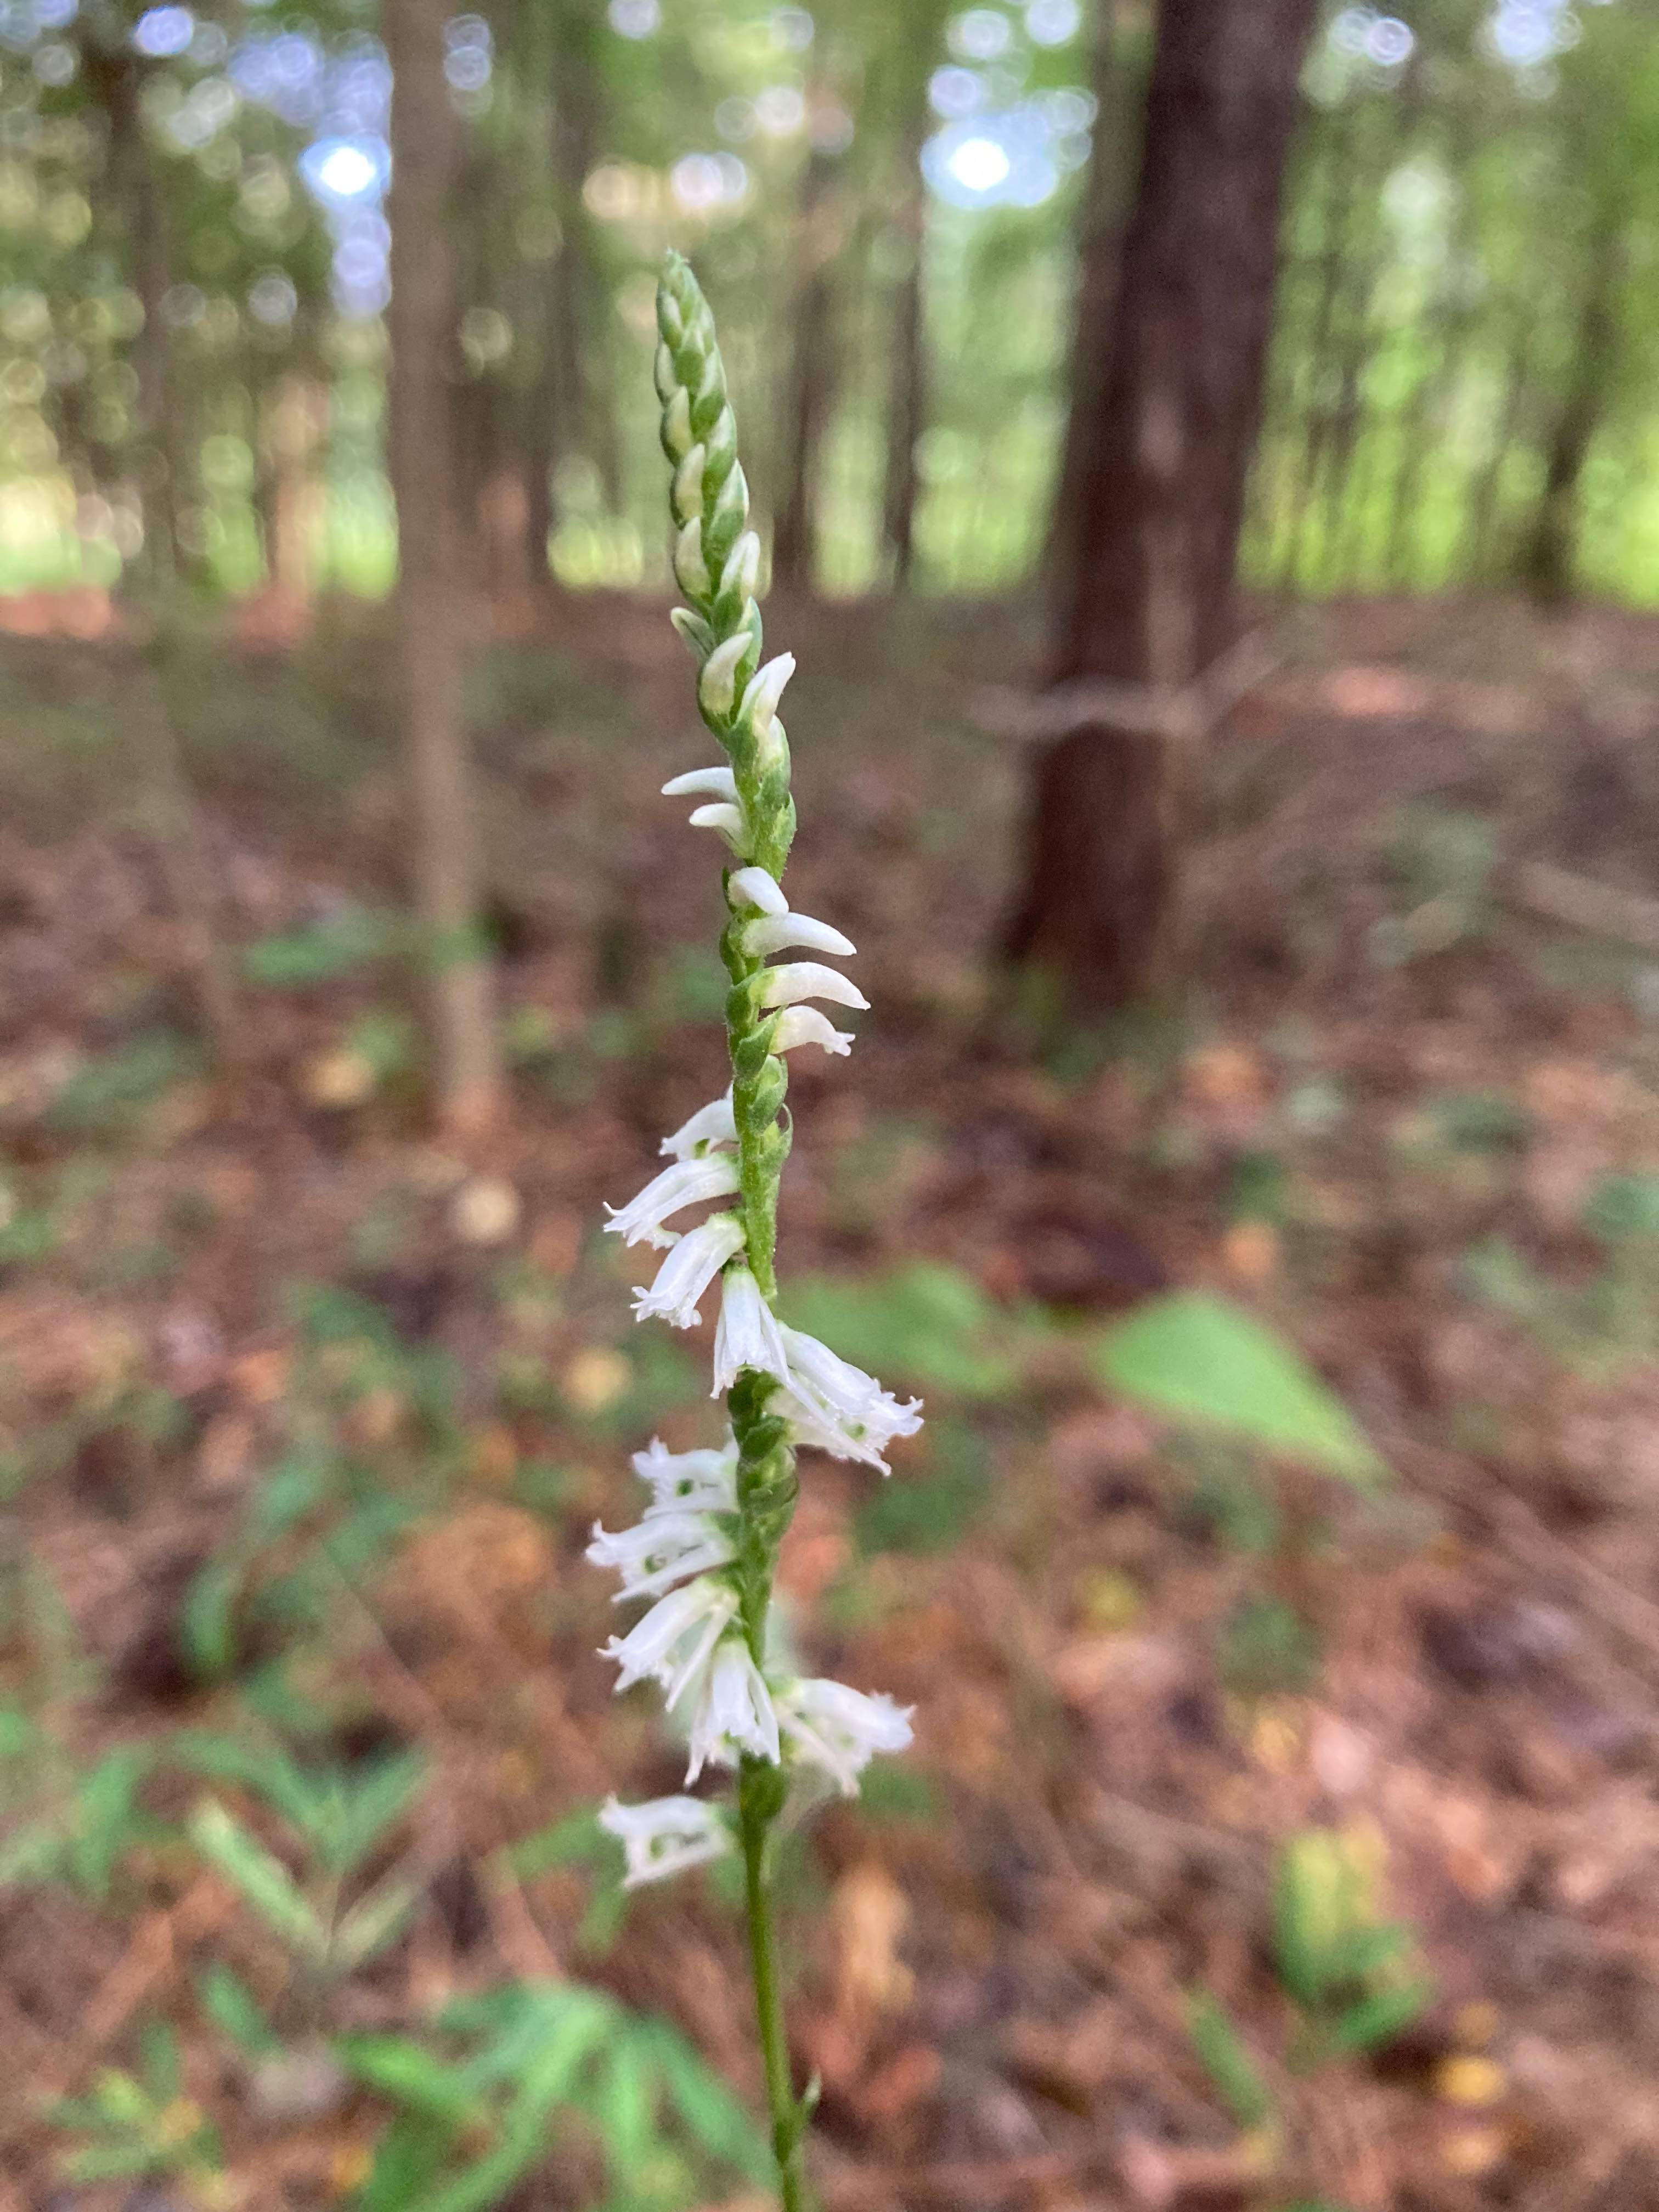 The Scientific Name is Spiranthes lacera var. gracilis. You will likely hear them called Southern Slender Ladies'-tresses, Ladies' Tresses. This picture shows the Blooming in the woods late August. of Spiranthes lacera var. gracilis